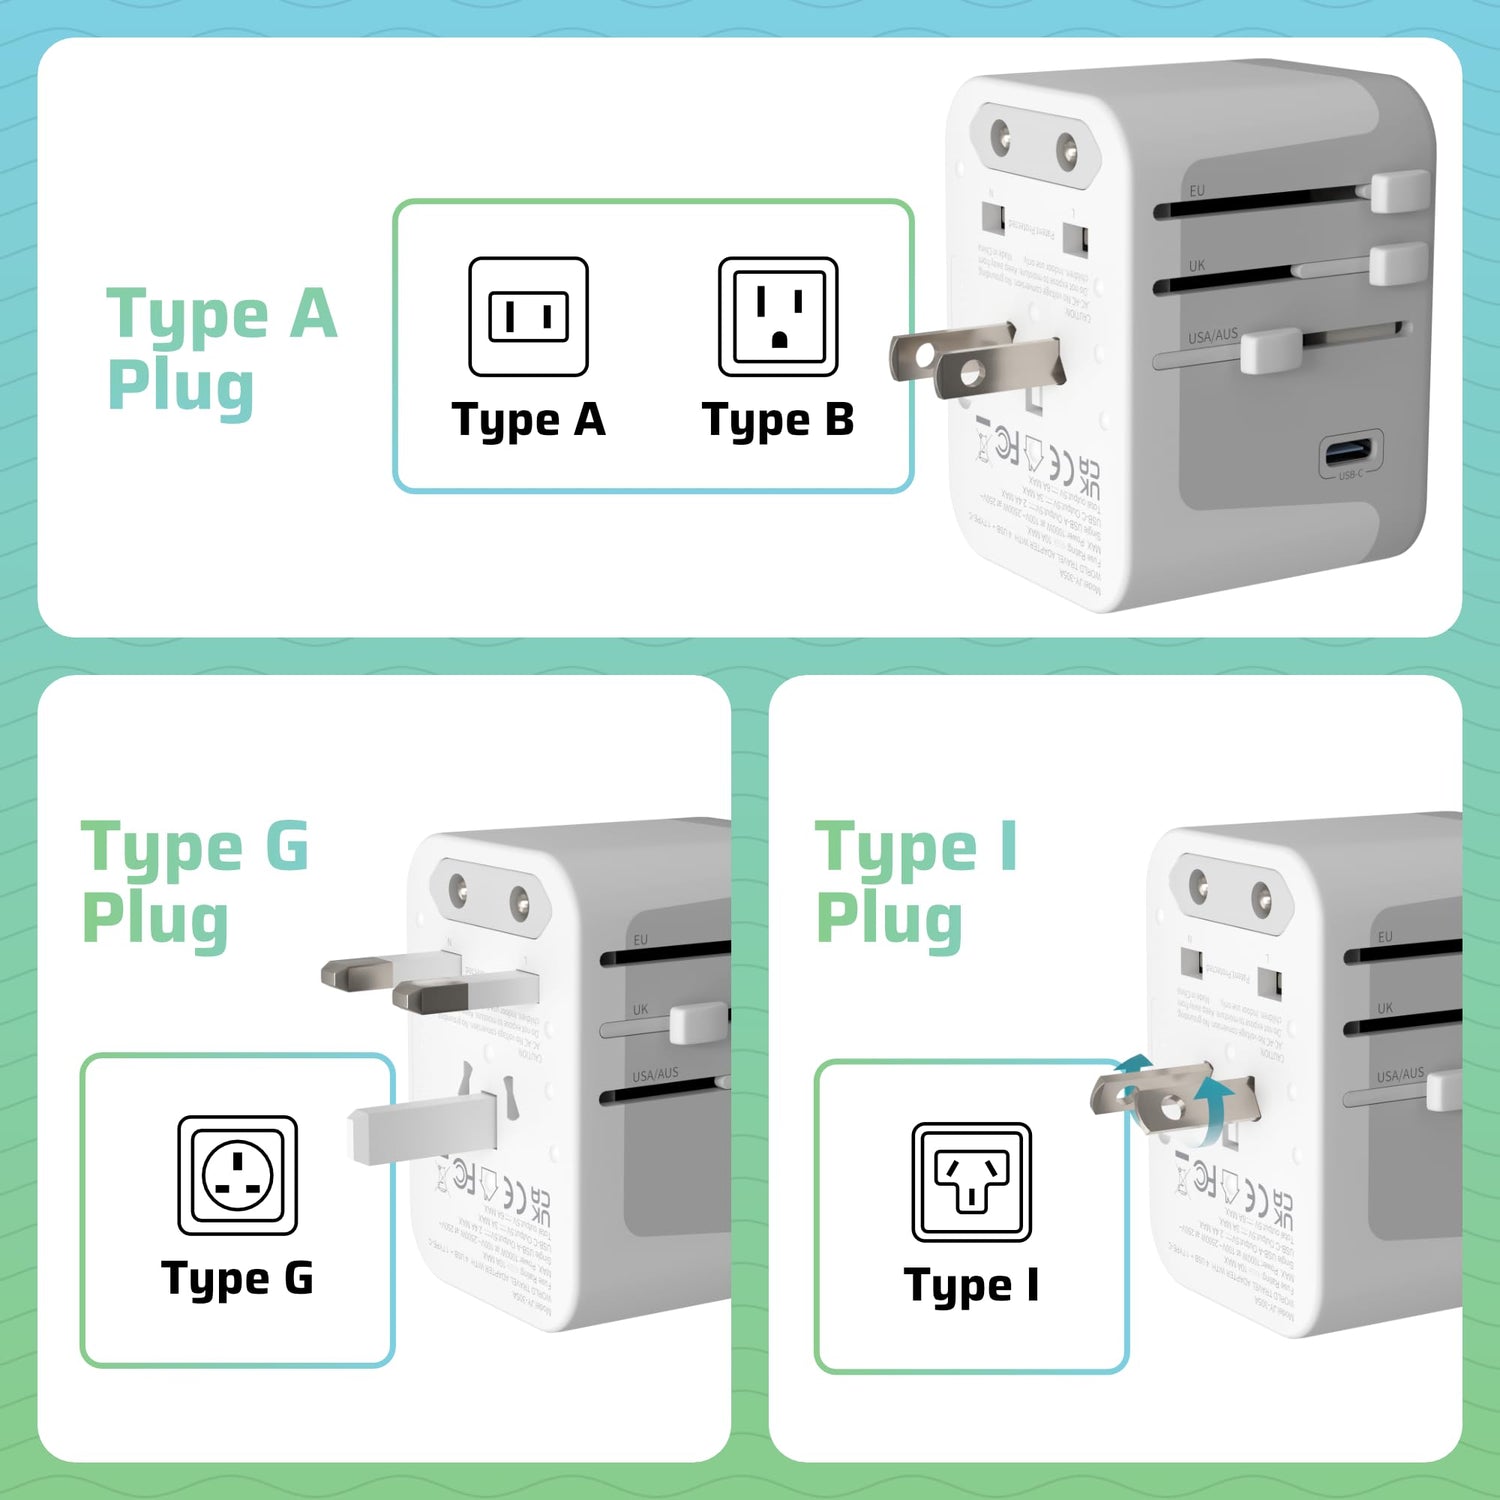 Universal Travel Adapter, International Power Plug Adapter with 4 USB-A and 1 USB-C Ports, All-in-One Worldwide Wall Charger for USA EU UK AUS and 150+ Countries